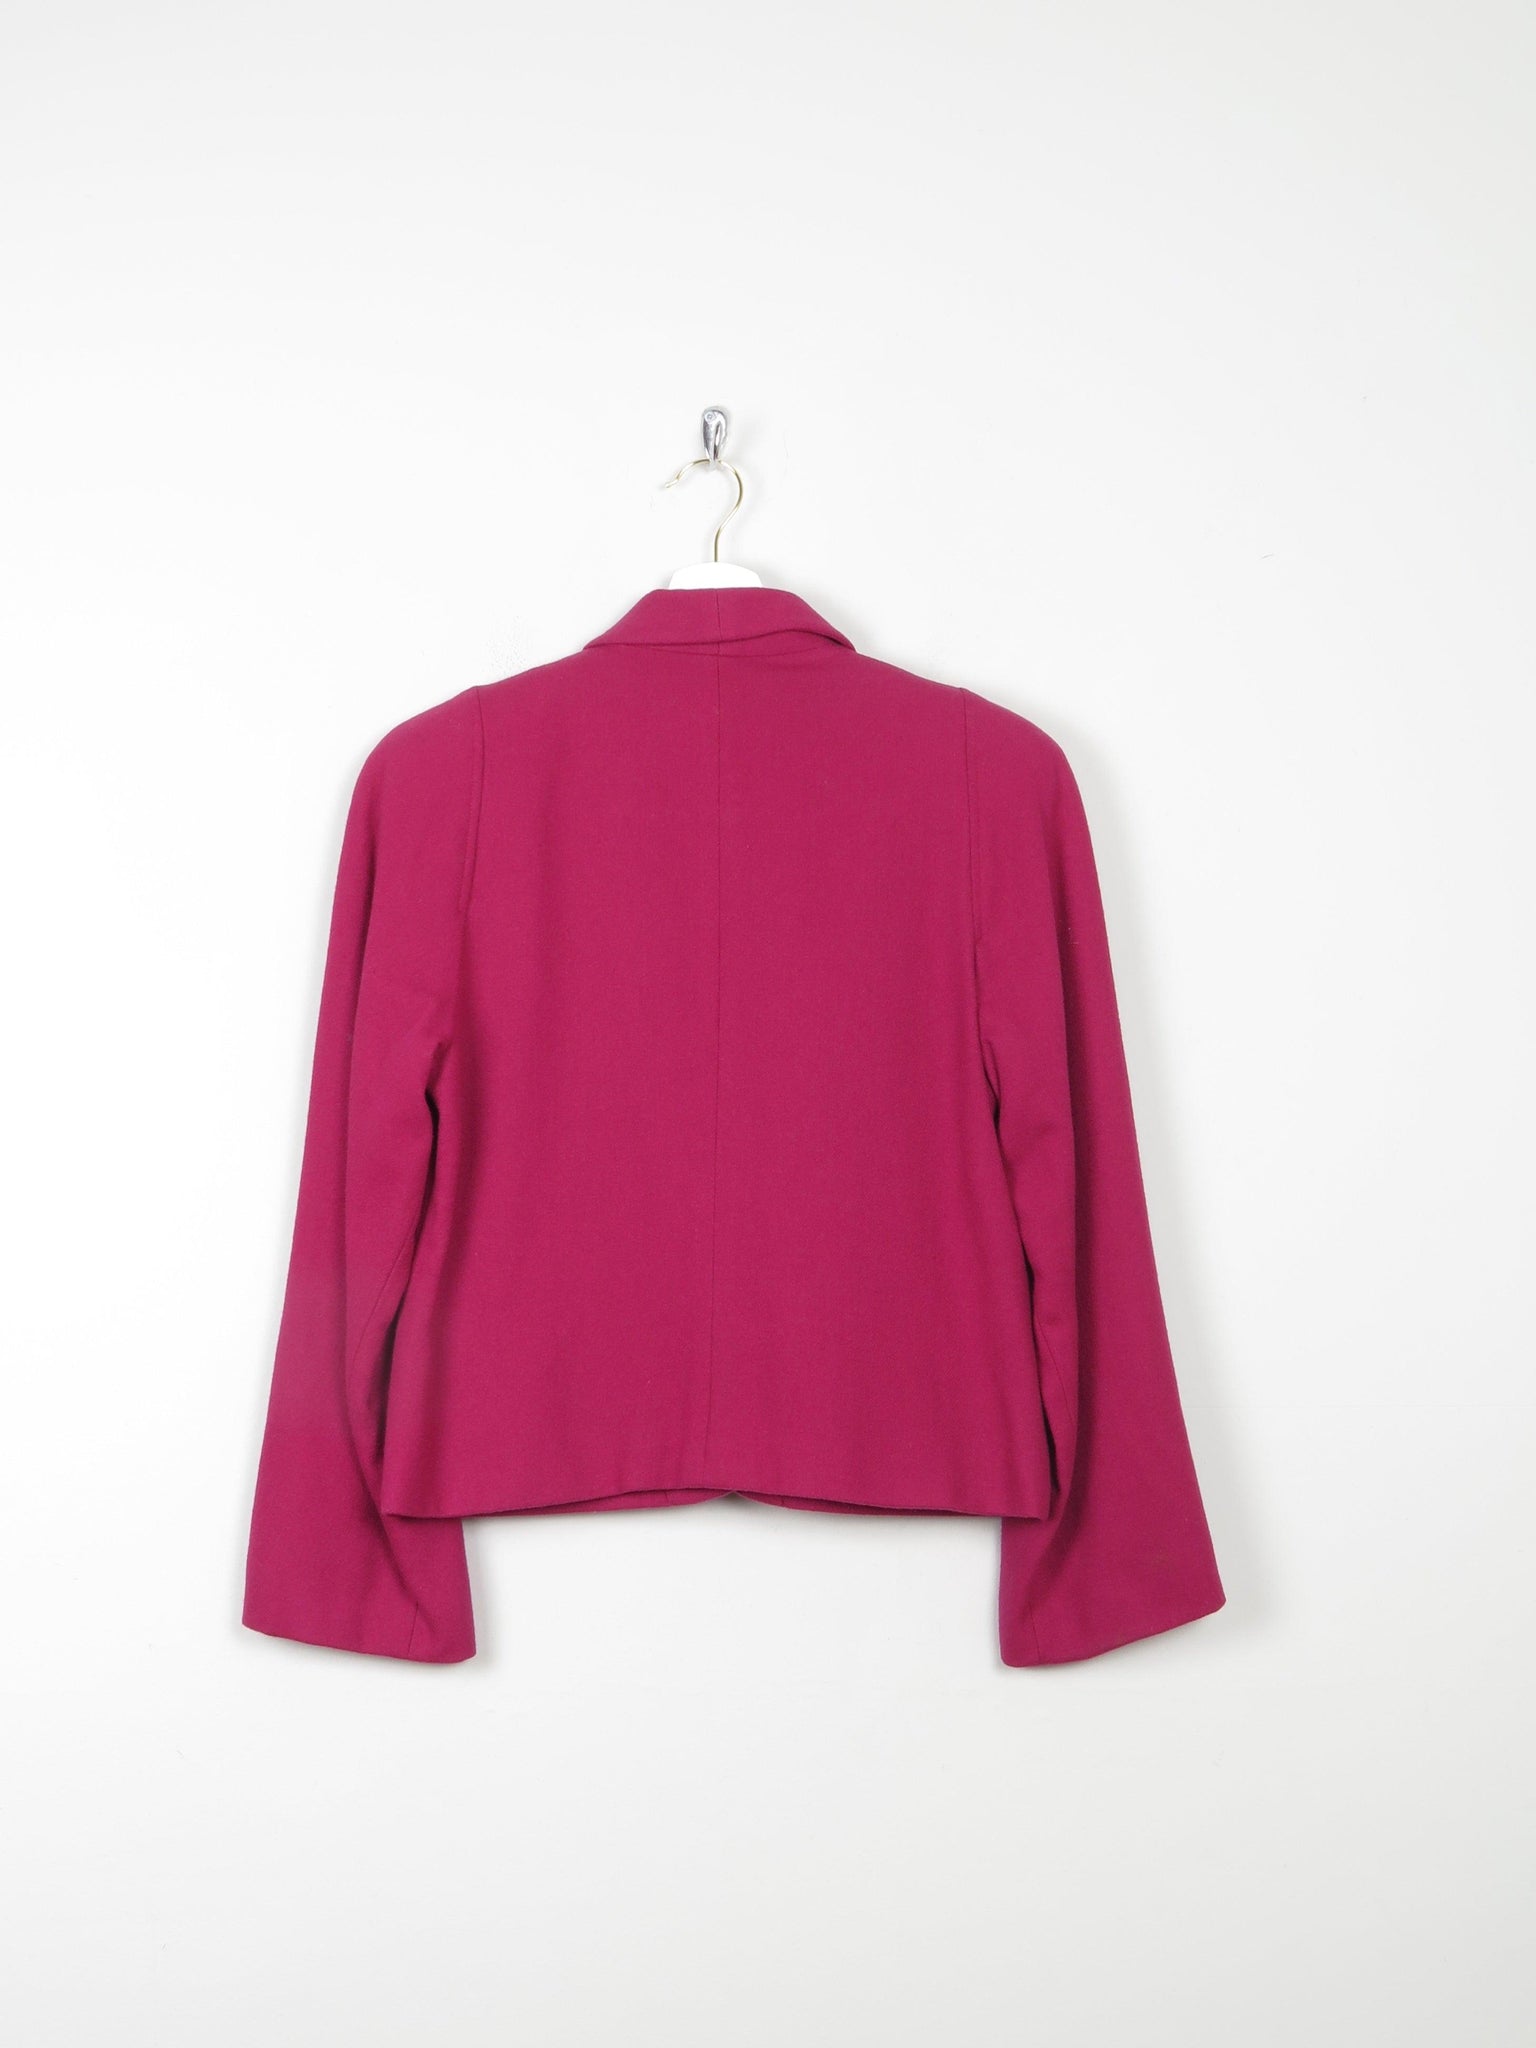 Women's Deep Pink Cropped Jacket 'Austin Hill' 8/10 - The Harlequin